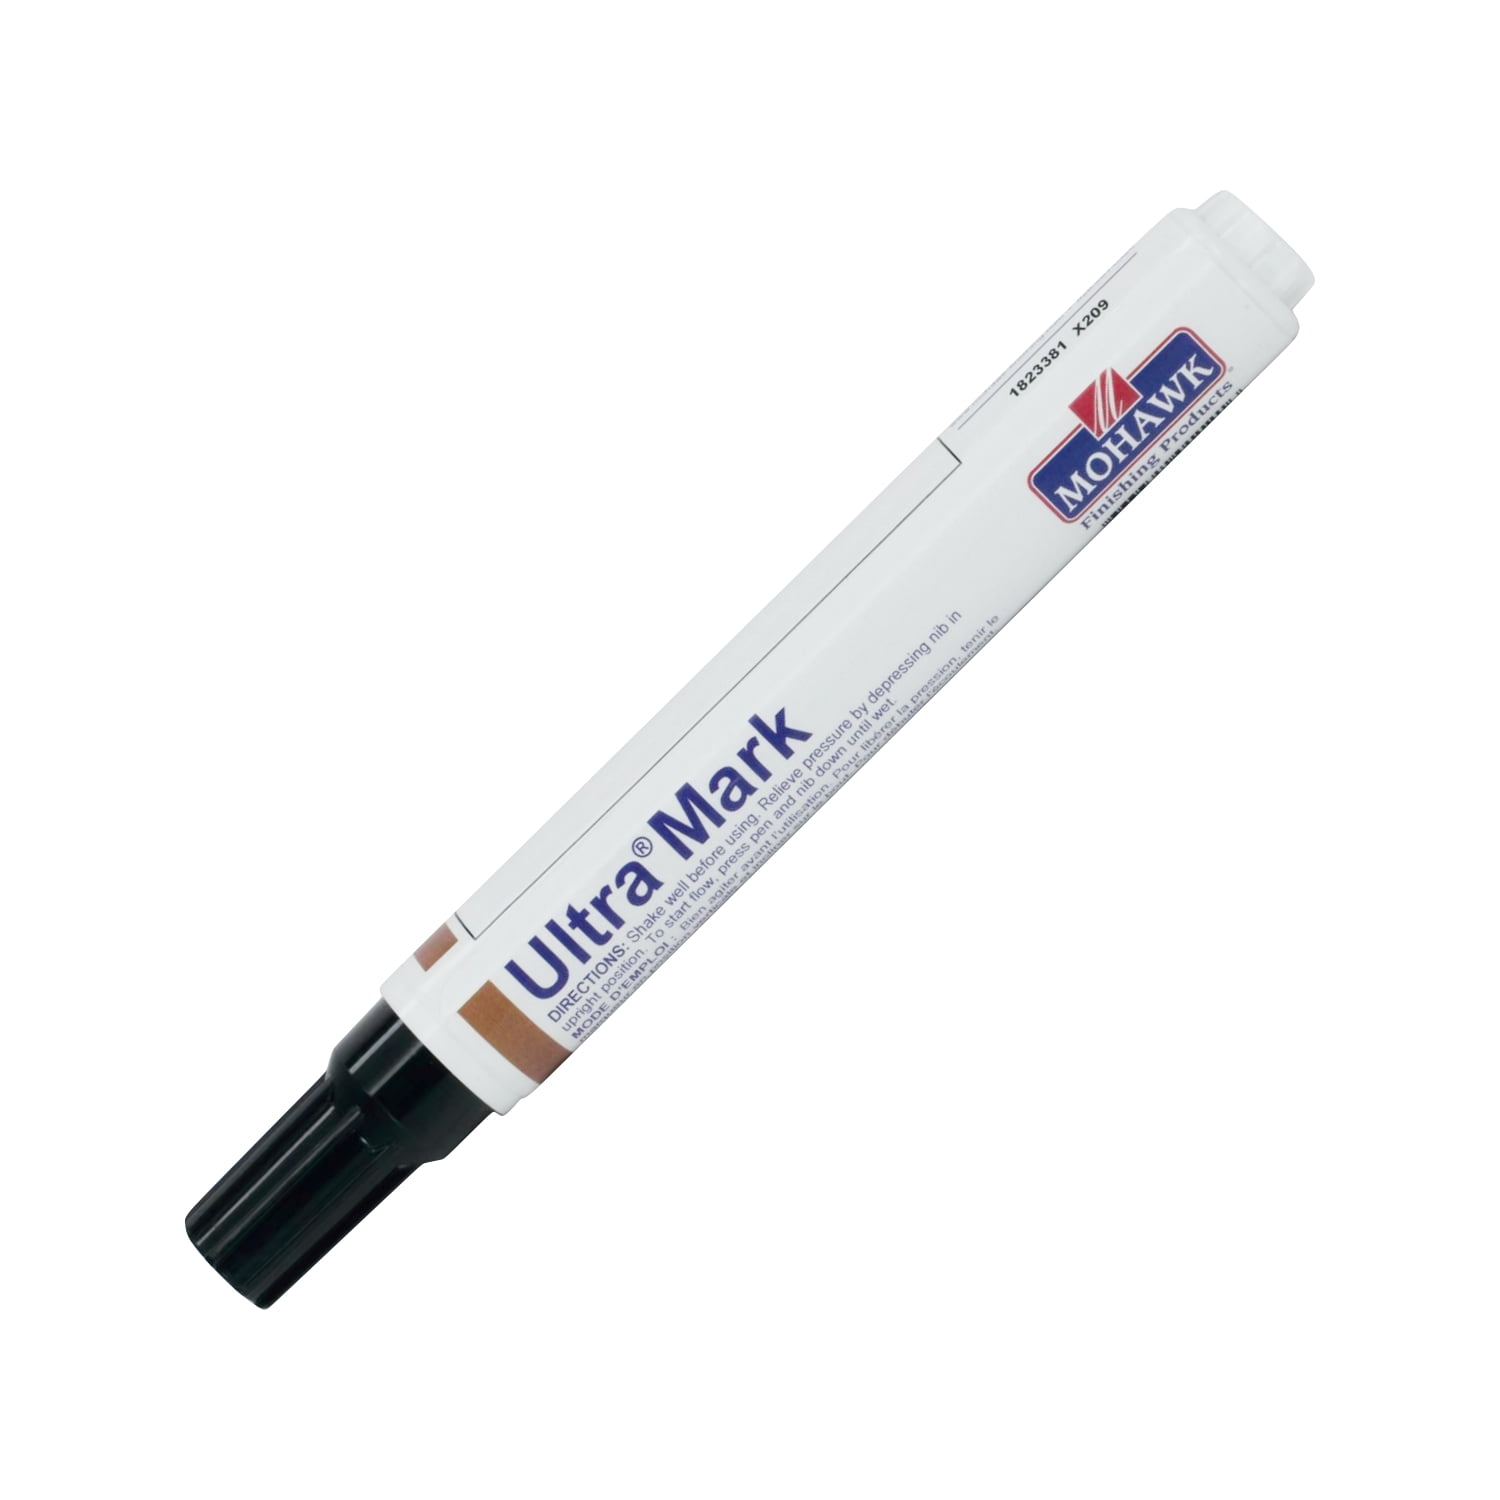 Touch Up Paint Pen - Easy to Control Refillable Paint Pen - Pack